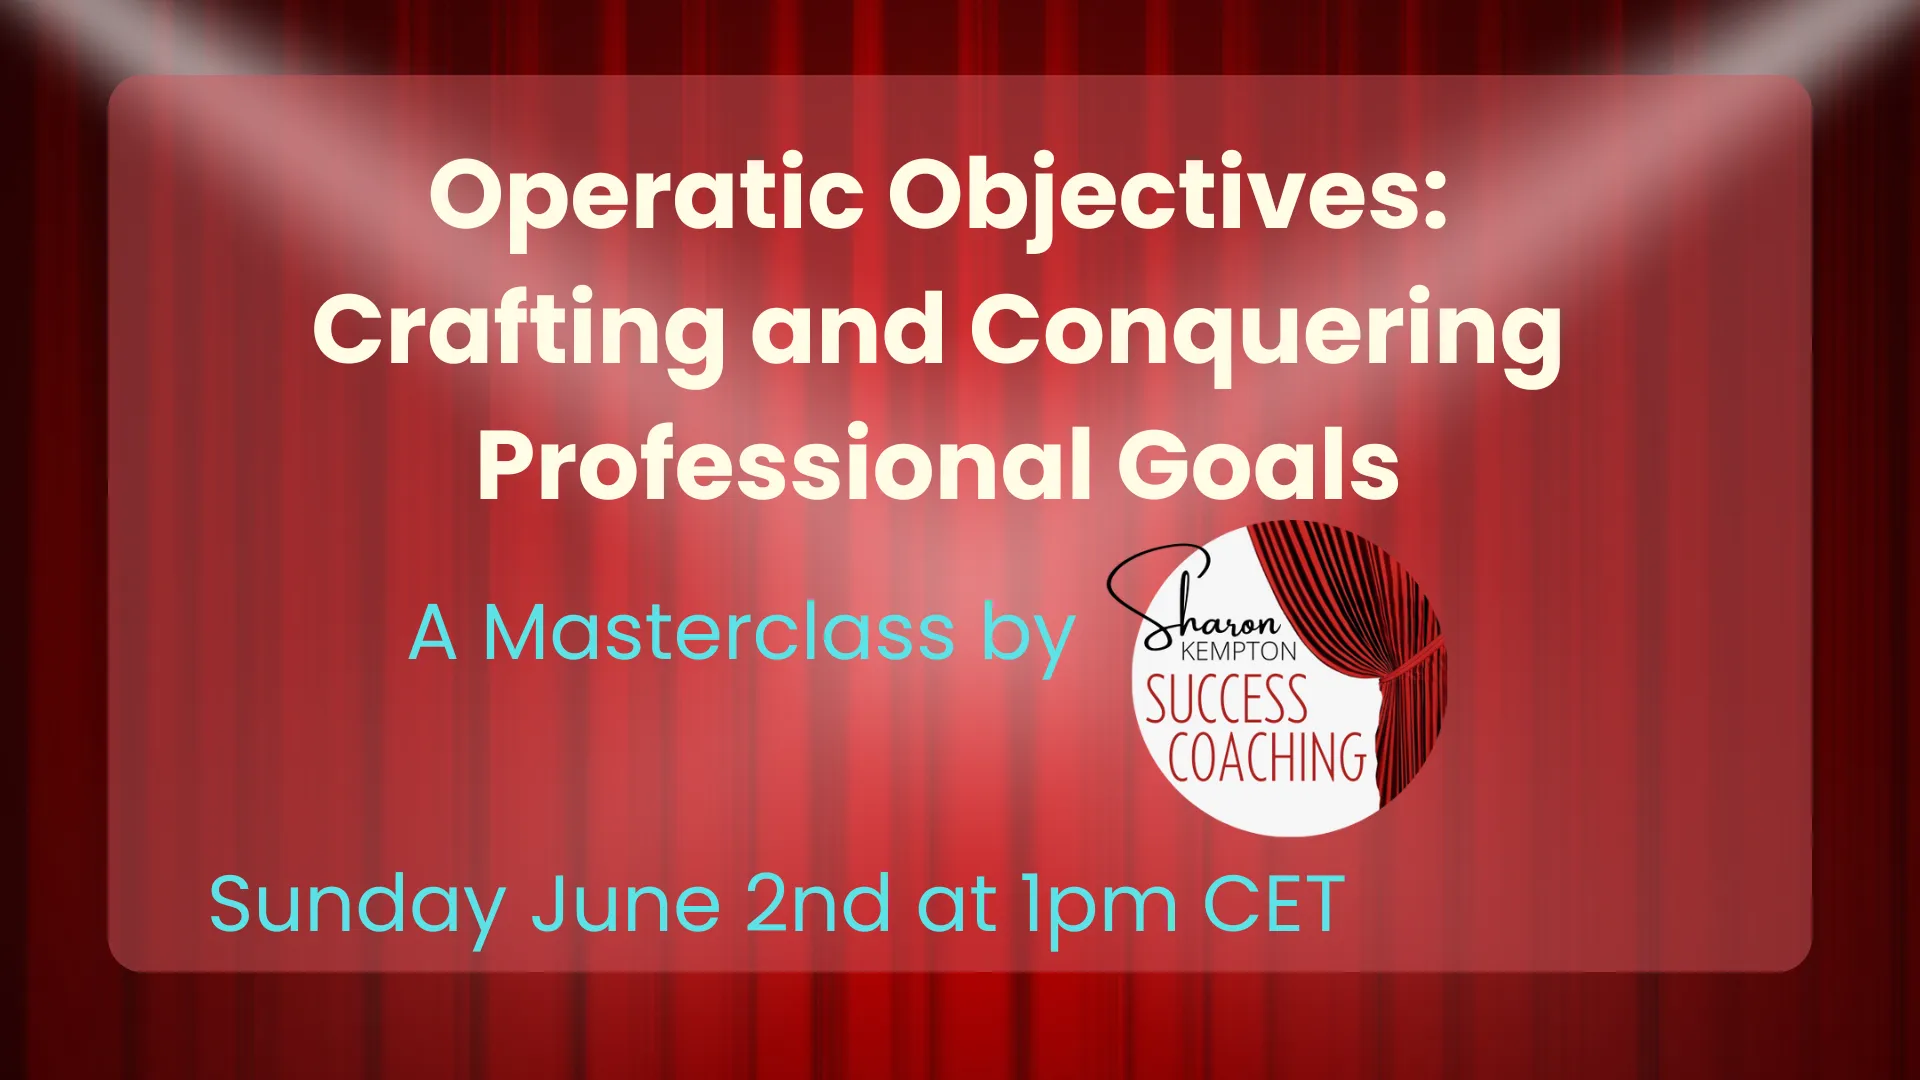 Live Masterclass - Operatic Objectives: Crafting and Conquering Professional Goals